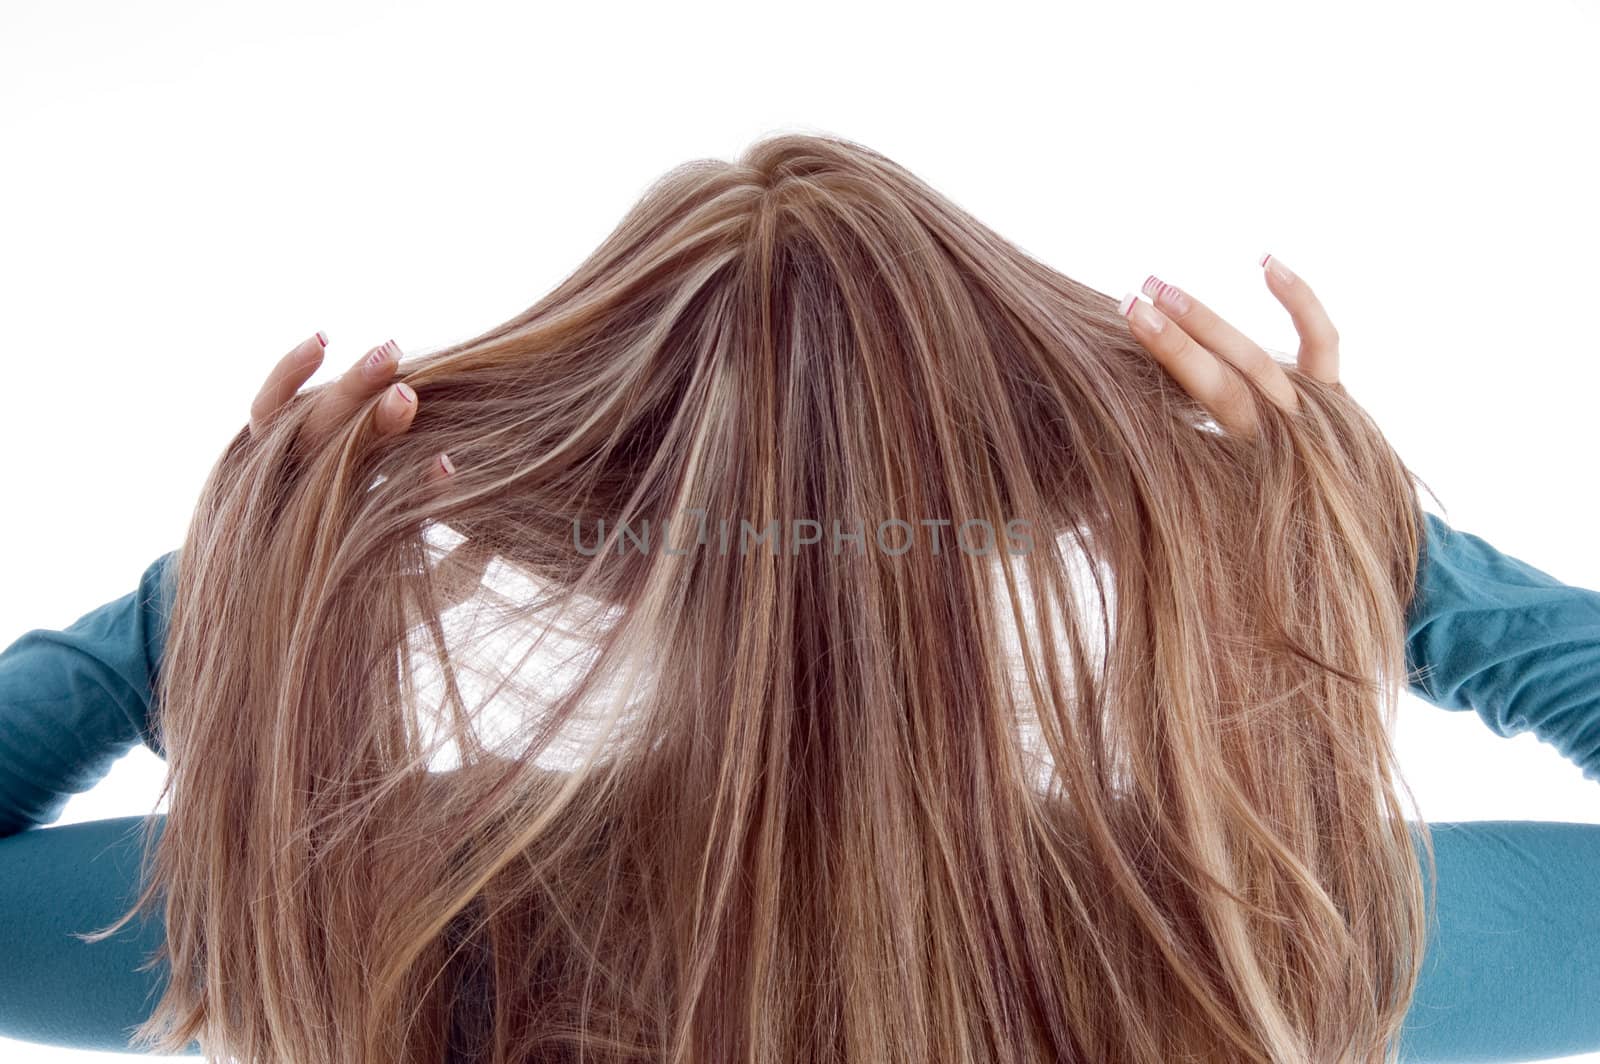 hair of blonde woman on an isolated background